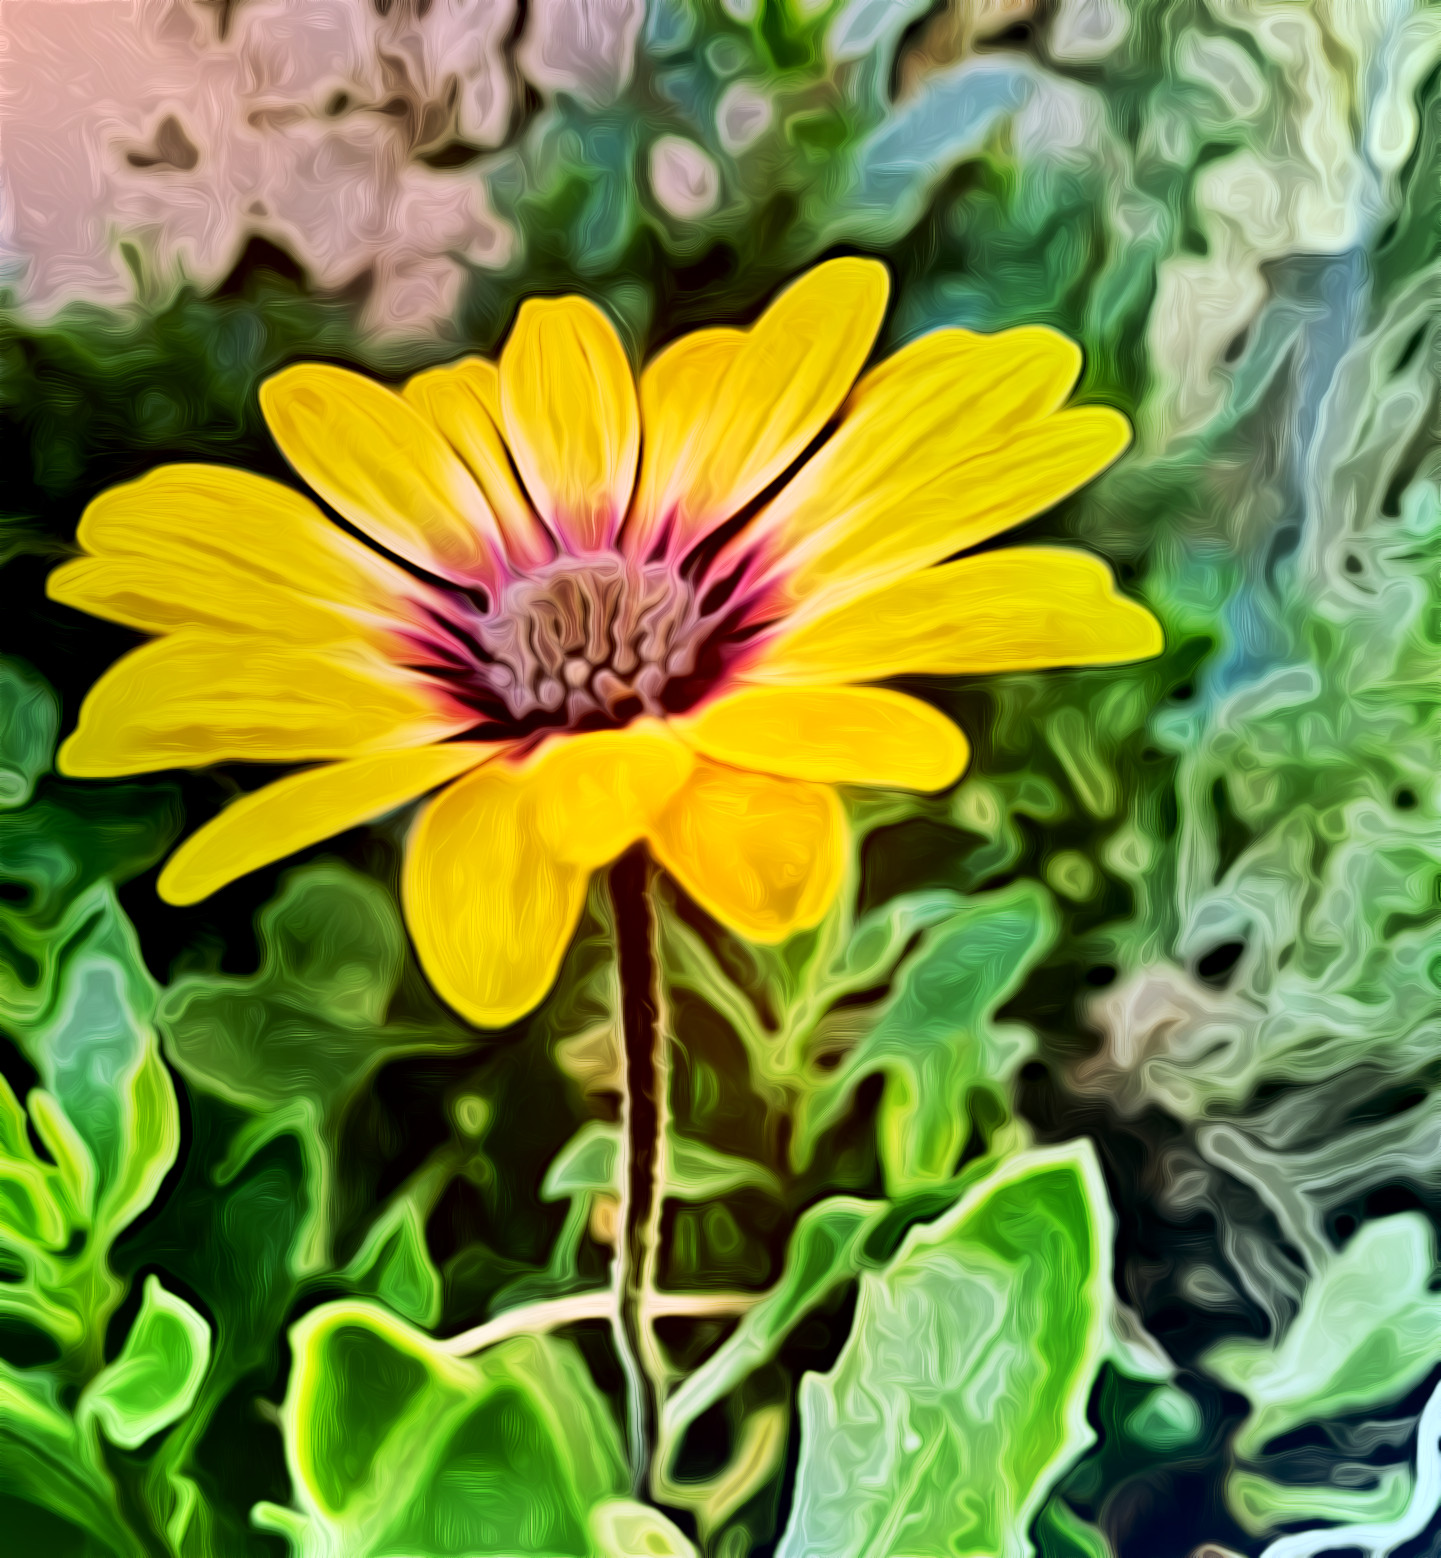 another_flower_by_ilaughter_dedveie_JvidEffect_A2.jpg